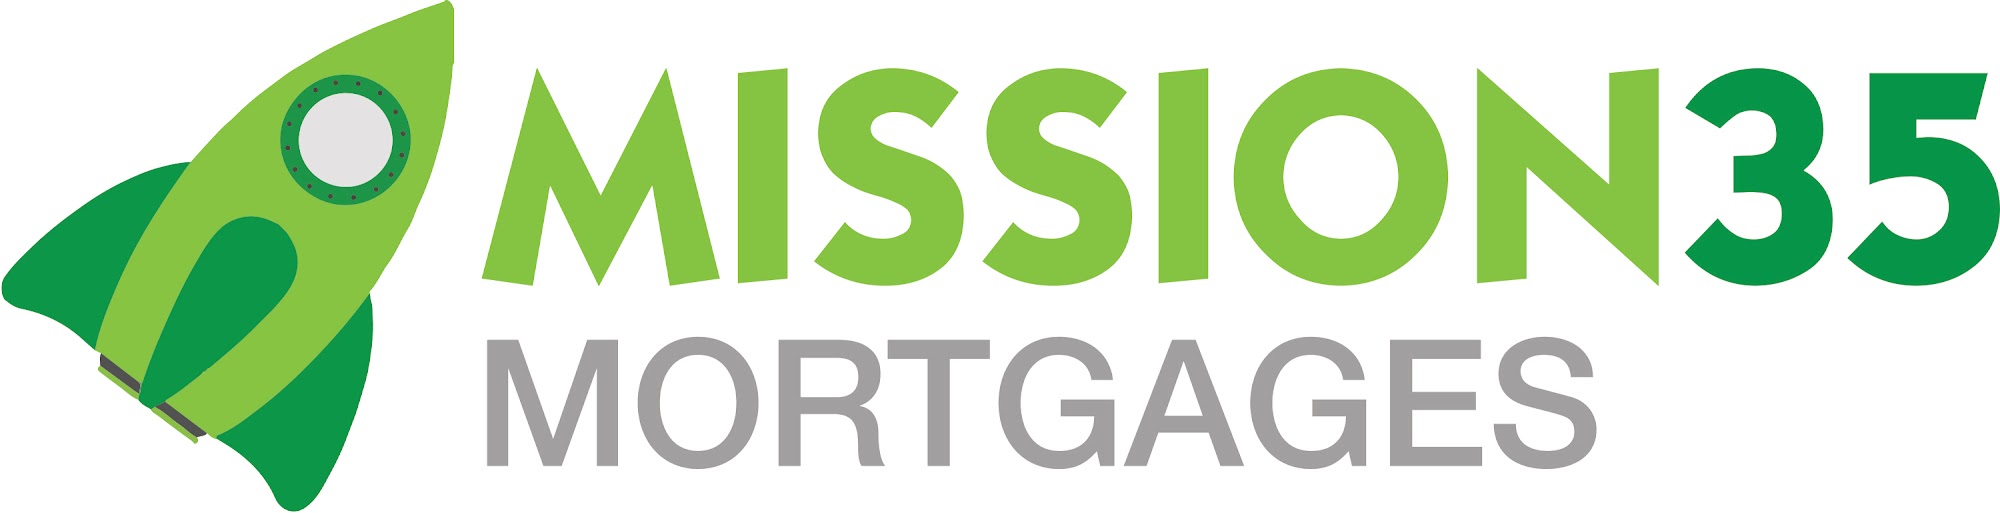 Matt Brownlow, Mission35 Mortgages 1 Meaghan St, Waterdown Ontario L8B 0H7